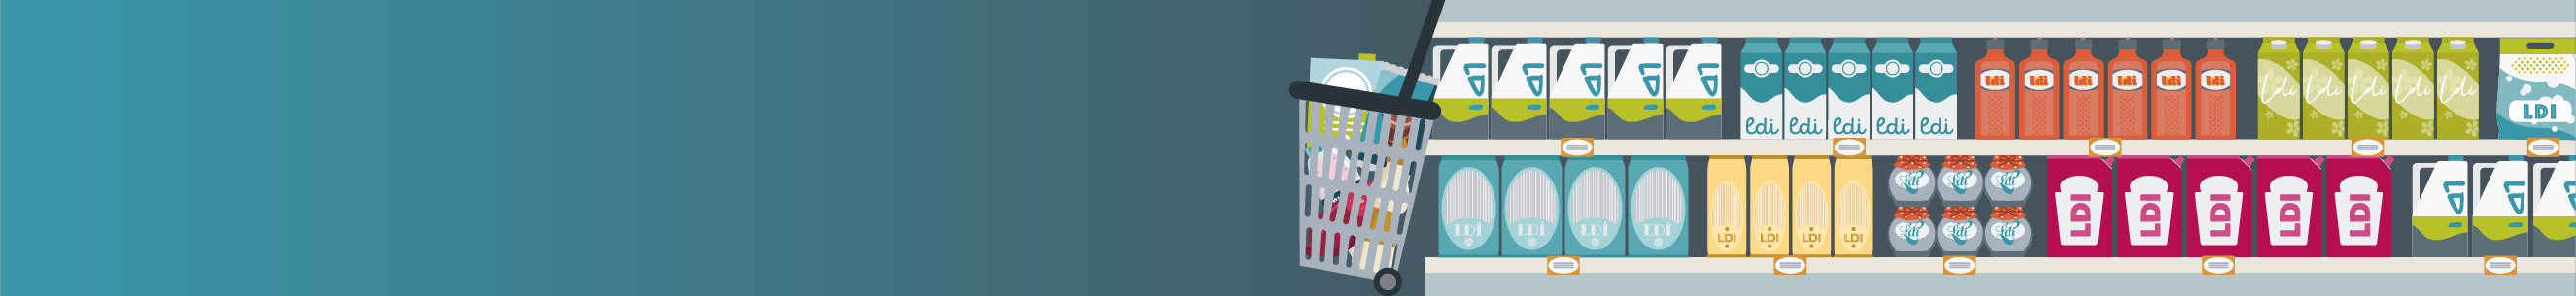 A digital drawing of grocery shelves filled with nondescript items and a small cart filled with groceries.